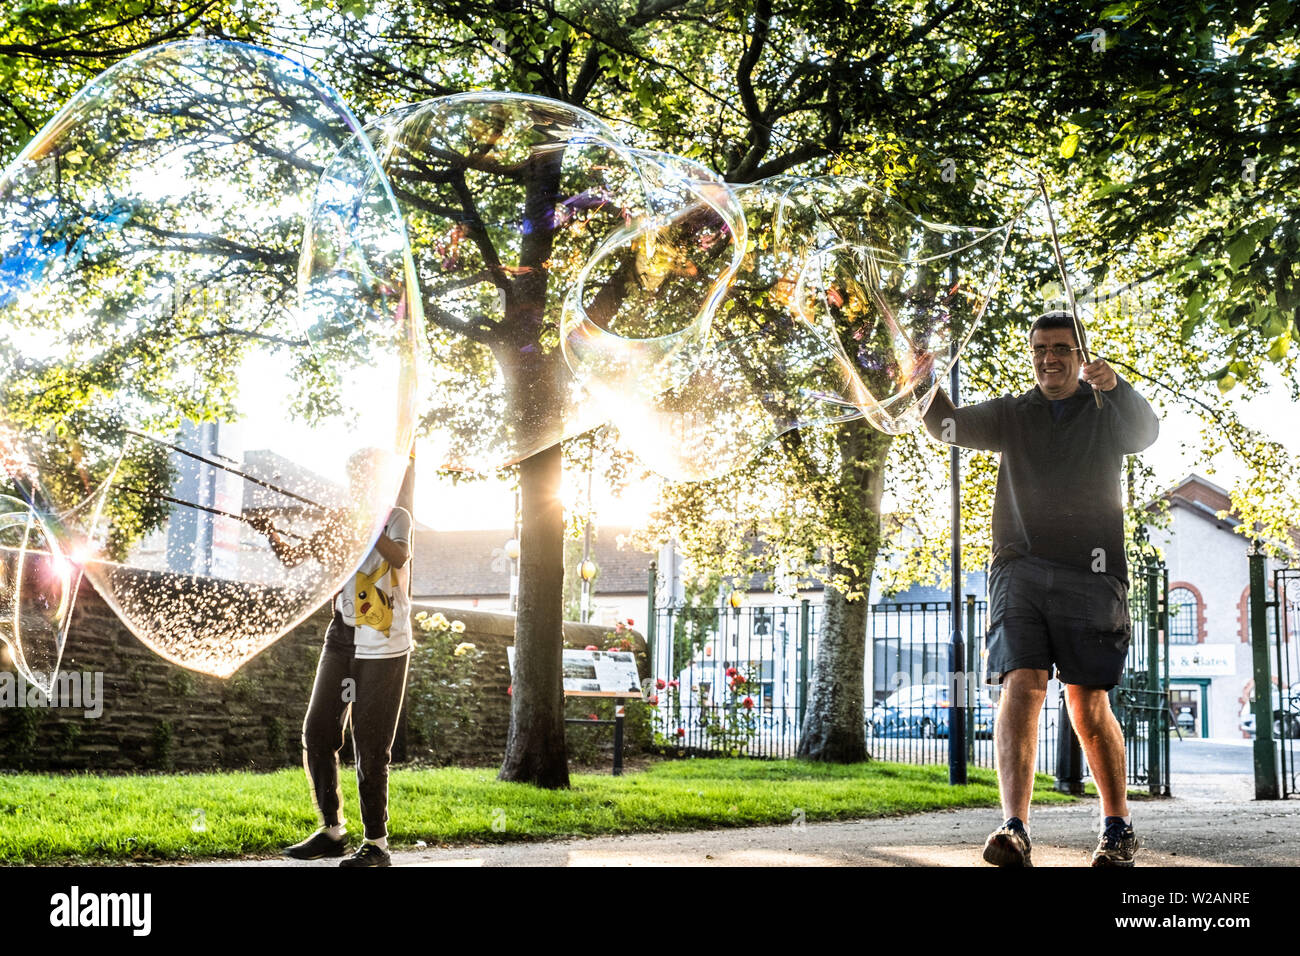 Aberystwyth Wales UK, Sunday 07 July 2019  UK Weather: A family in the park in Aberystwyth have fun making and playing  with giant soap bubble in the evening sunshine at the end of a warm summers day  in west Wales.   photo credit: Keith Morris/Alamy Live News Stock Photo